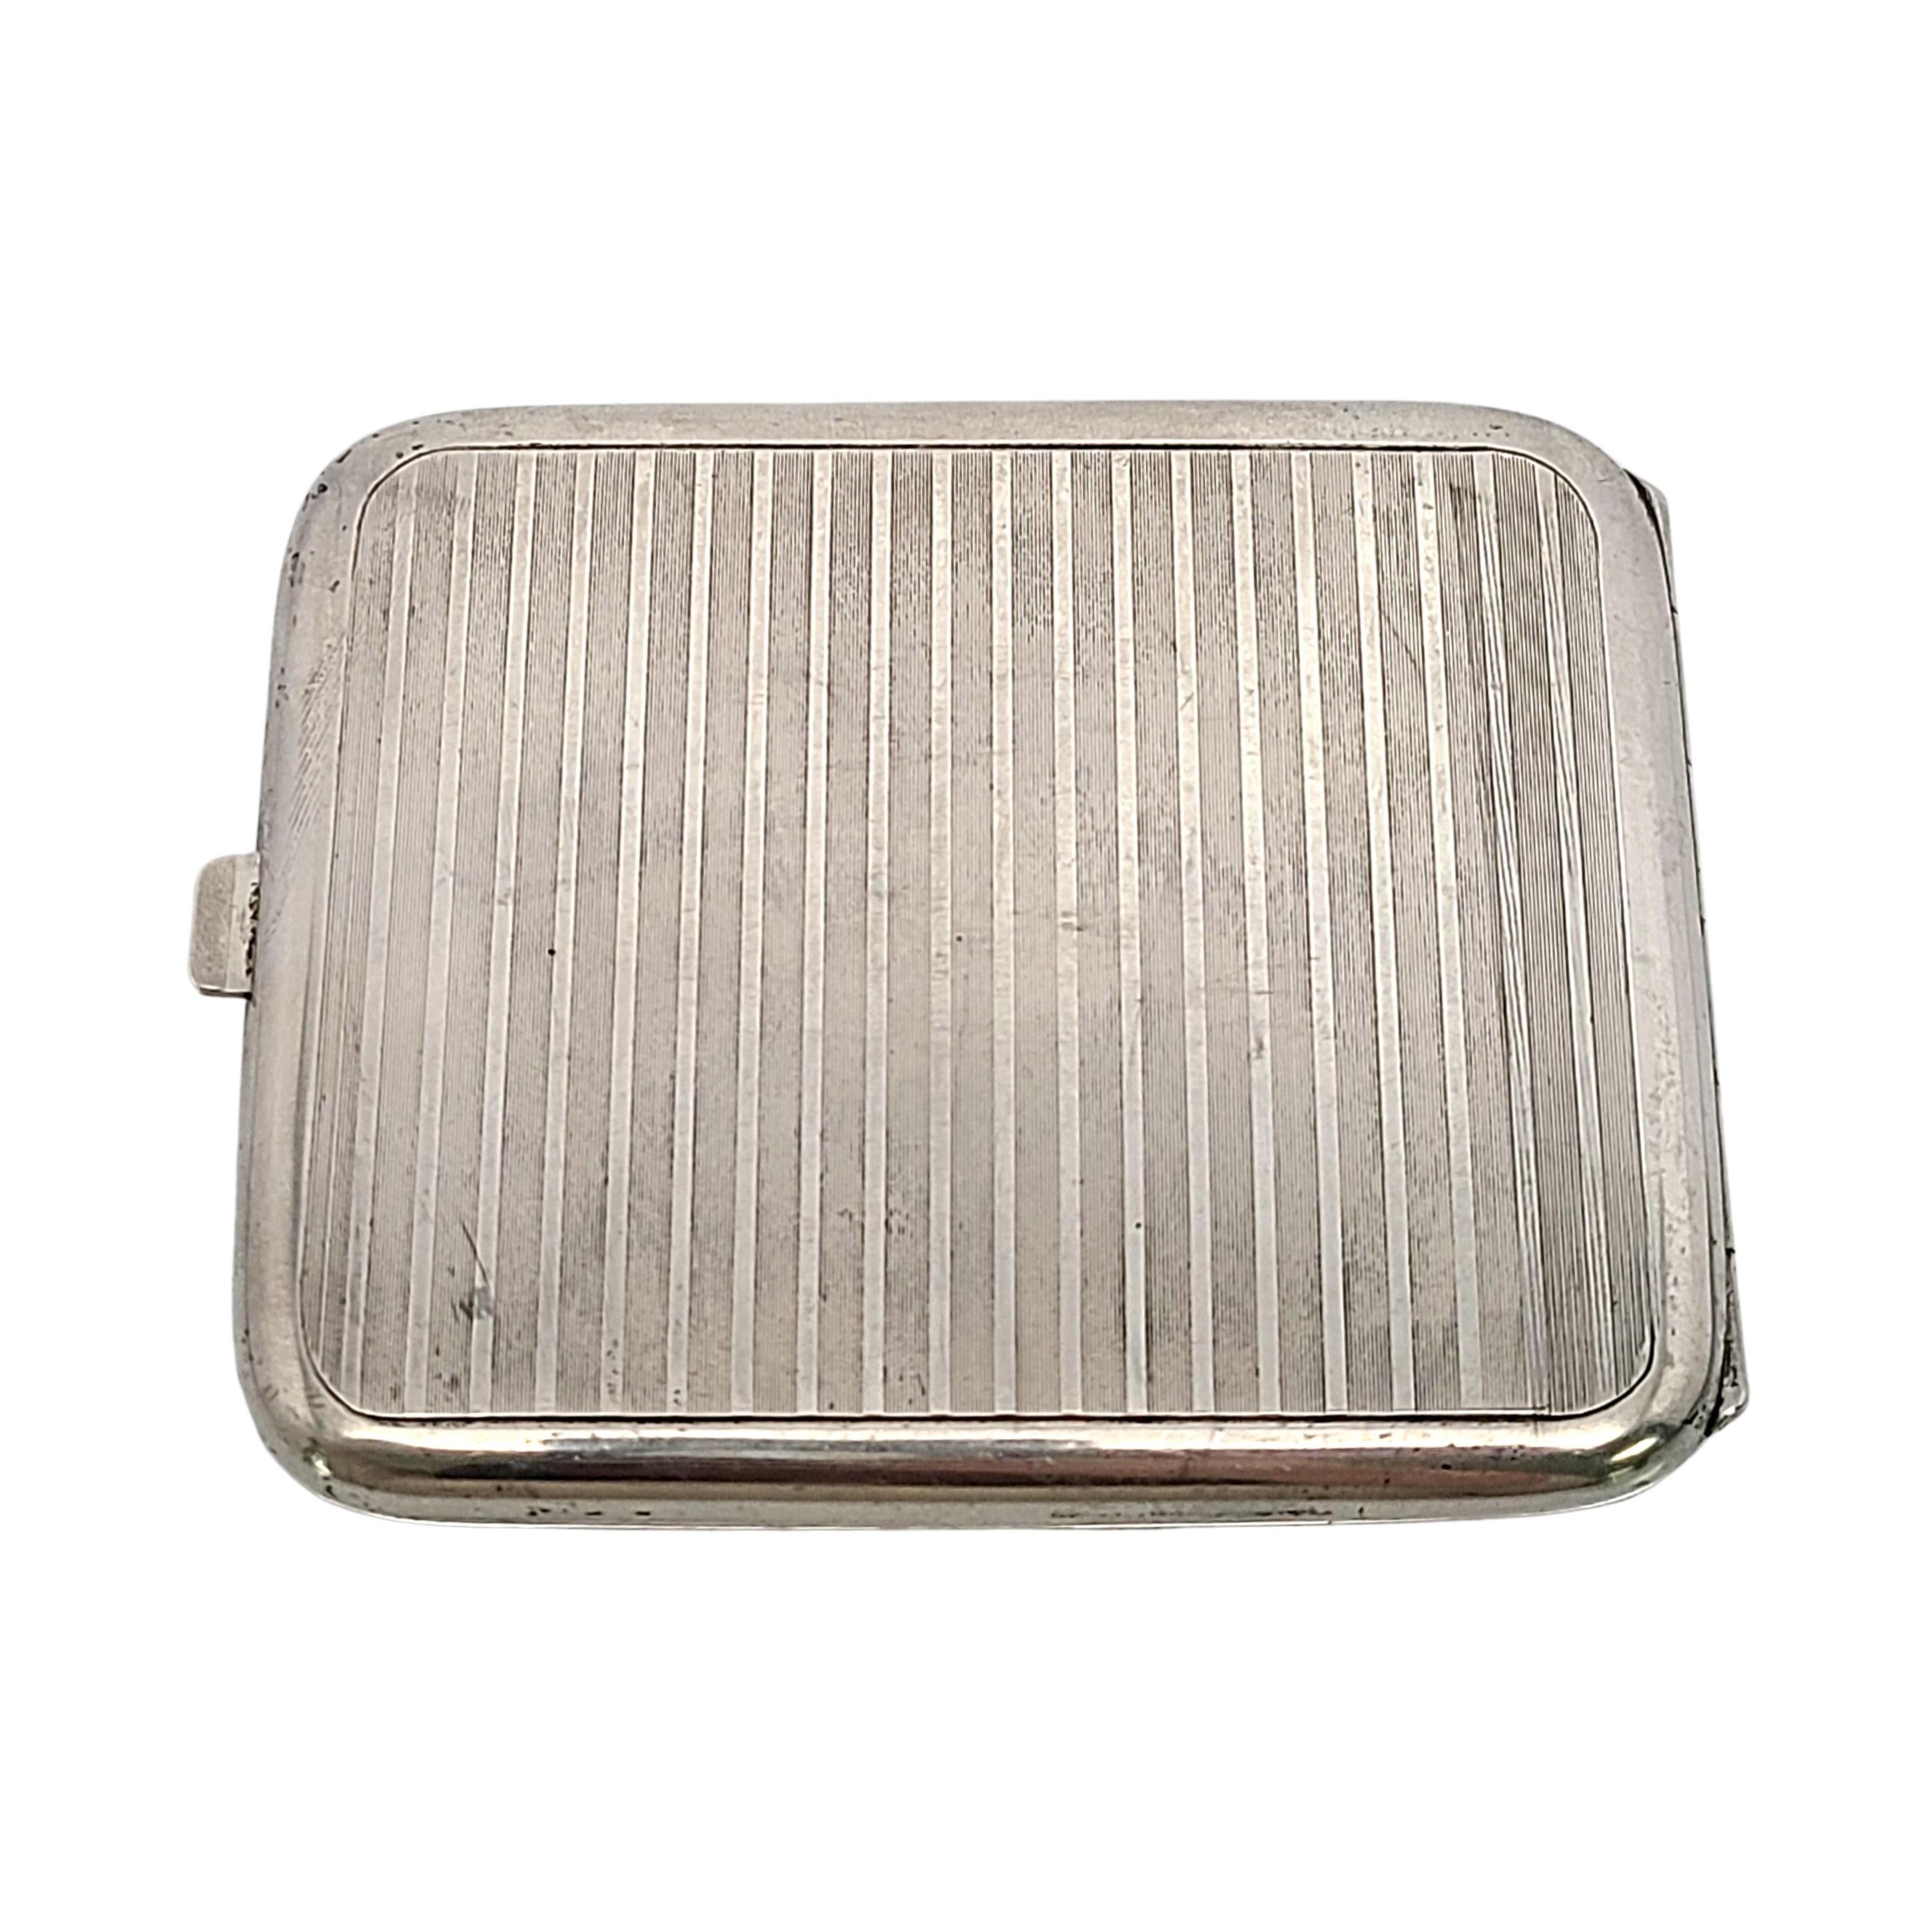 Vintage German 900 silver cigarette case by Wimmer & Rieth, with monogram.

Monogram appears to be WBS (inside the case)

Engine turned etched stripe sterling silver cigarette case with scroll design frame on the front. Gold wash interior. Case is